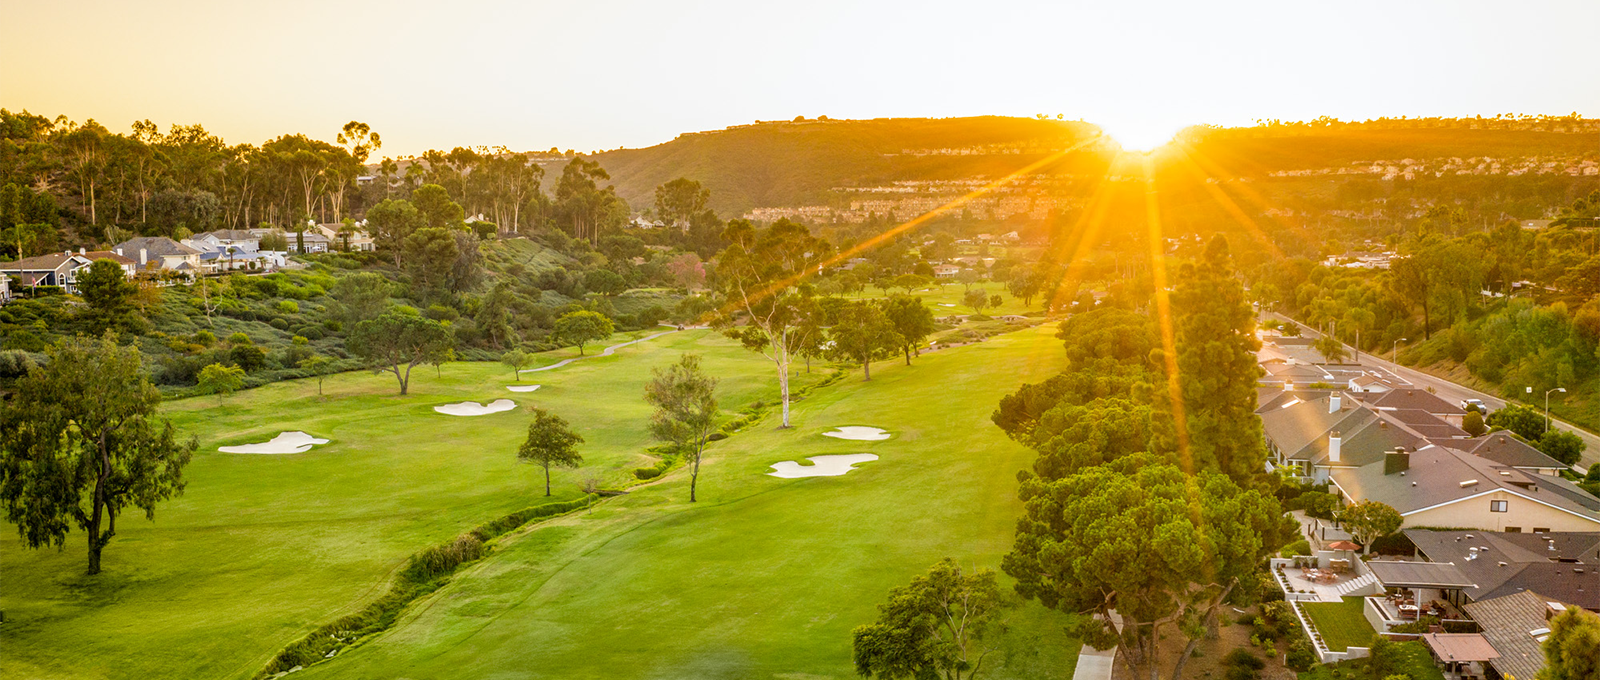 A sunset golden hour lit aerial view of the golfing green